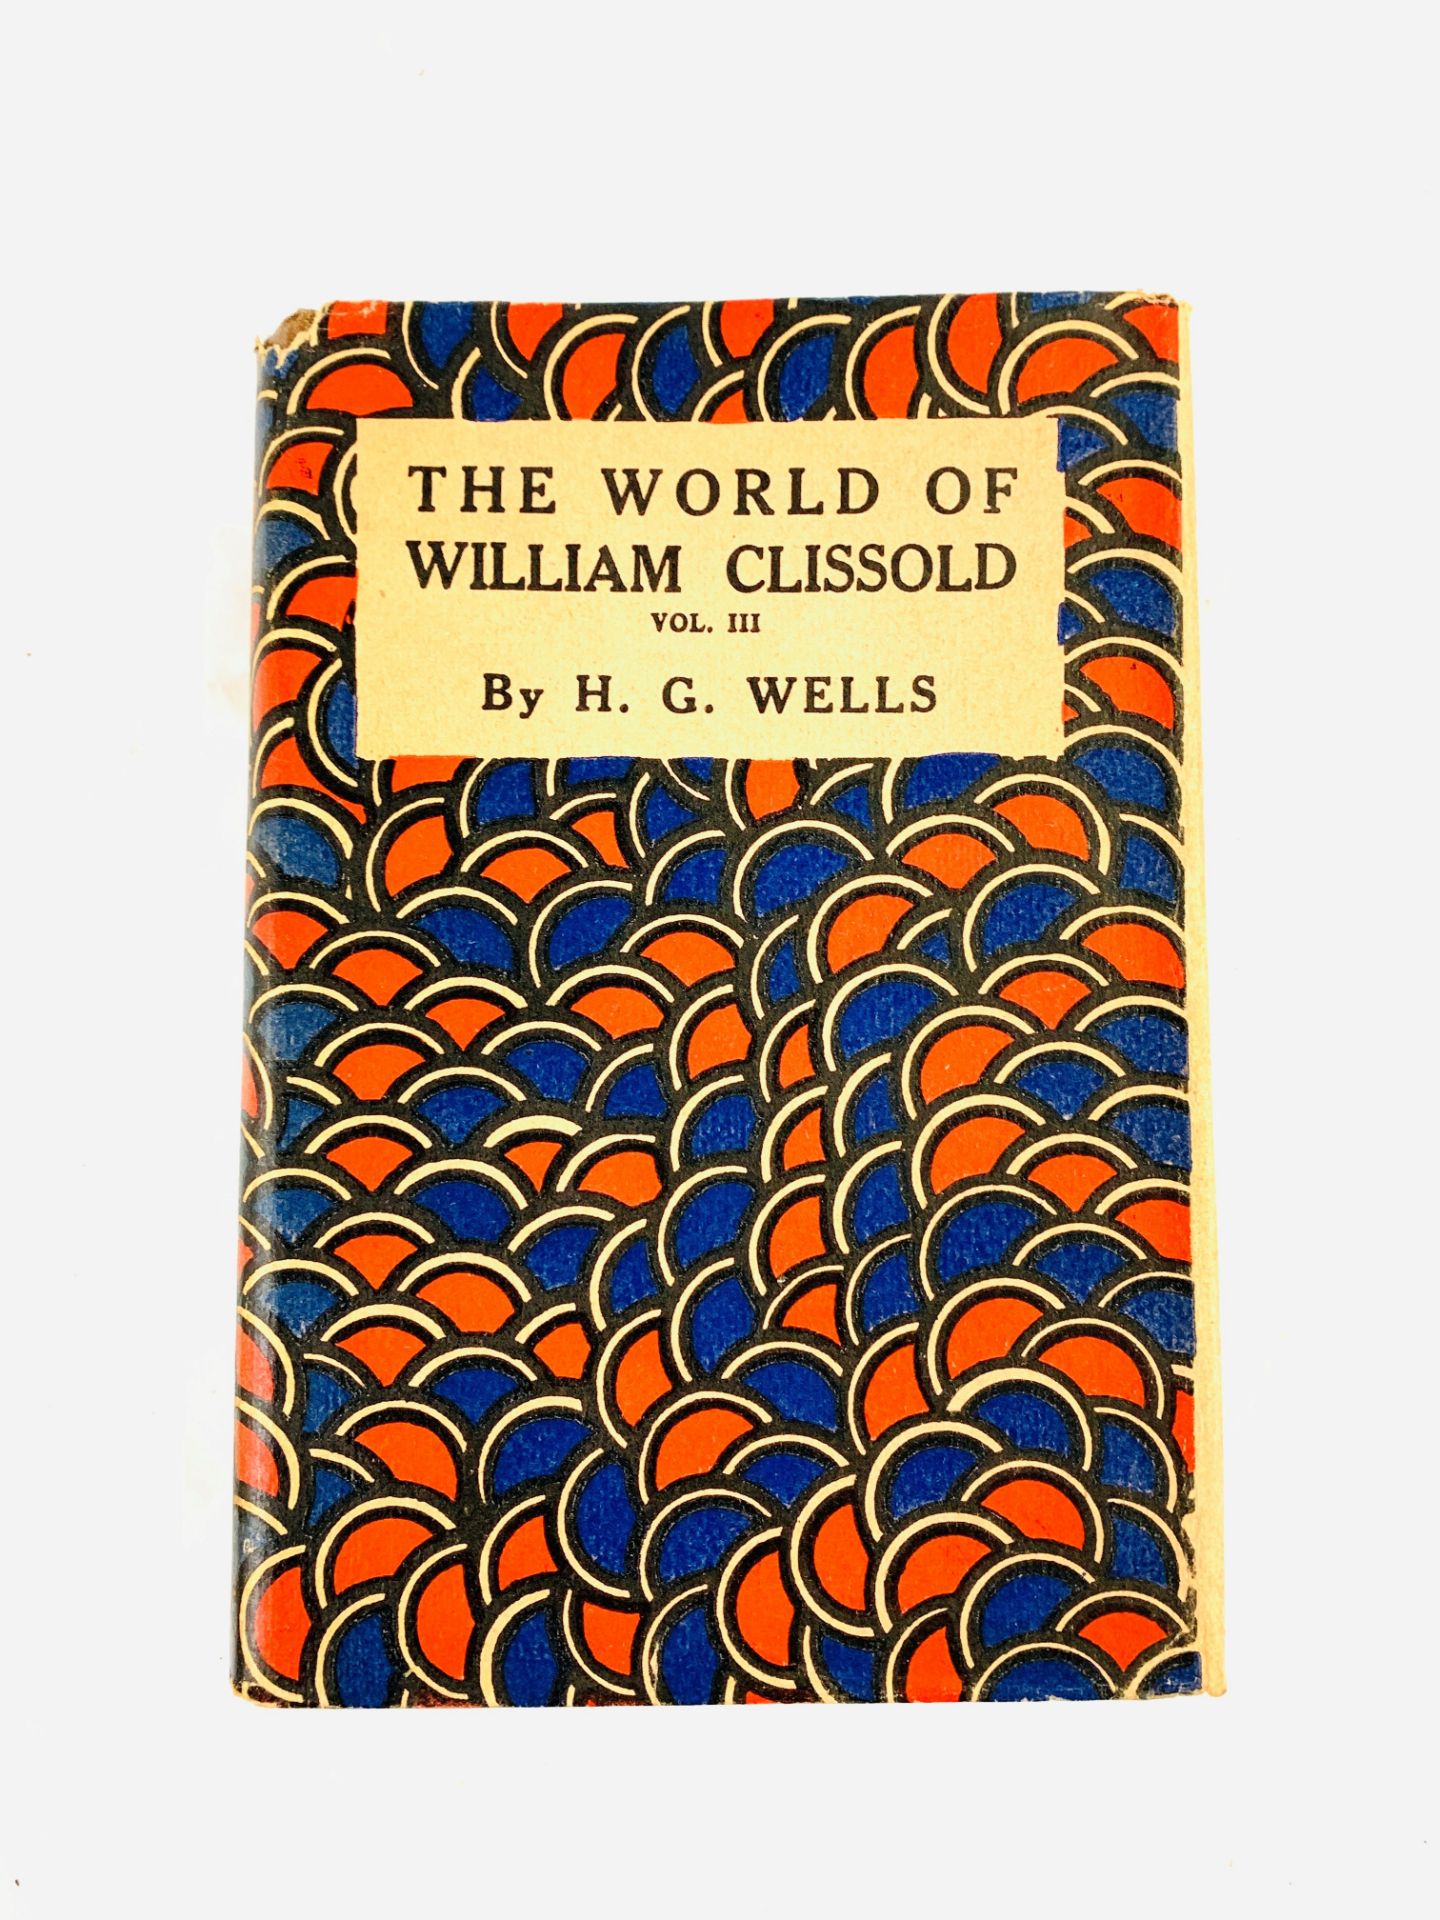 HG Wells: The World of William Clissold, 1926 - Image 2 of 4